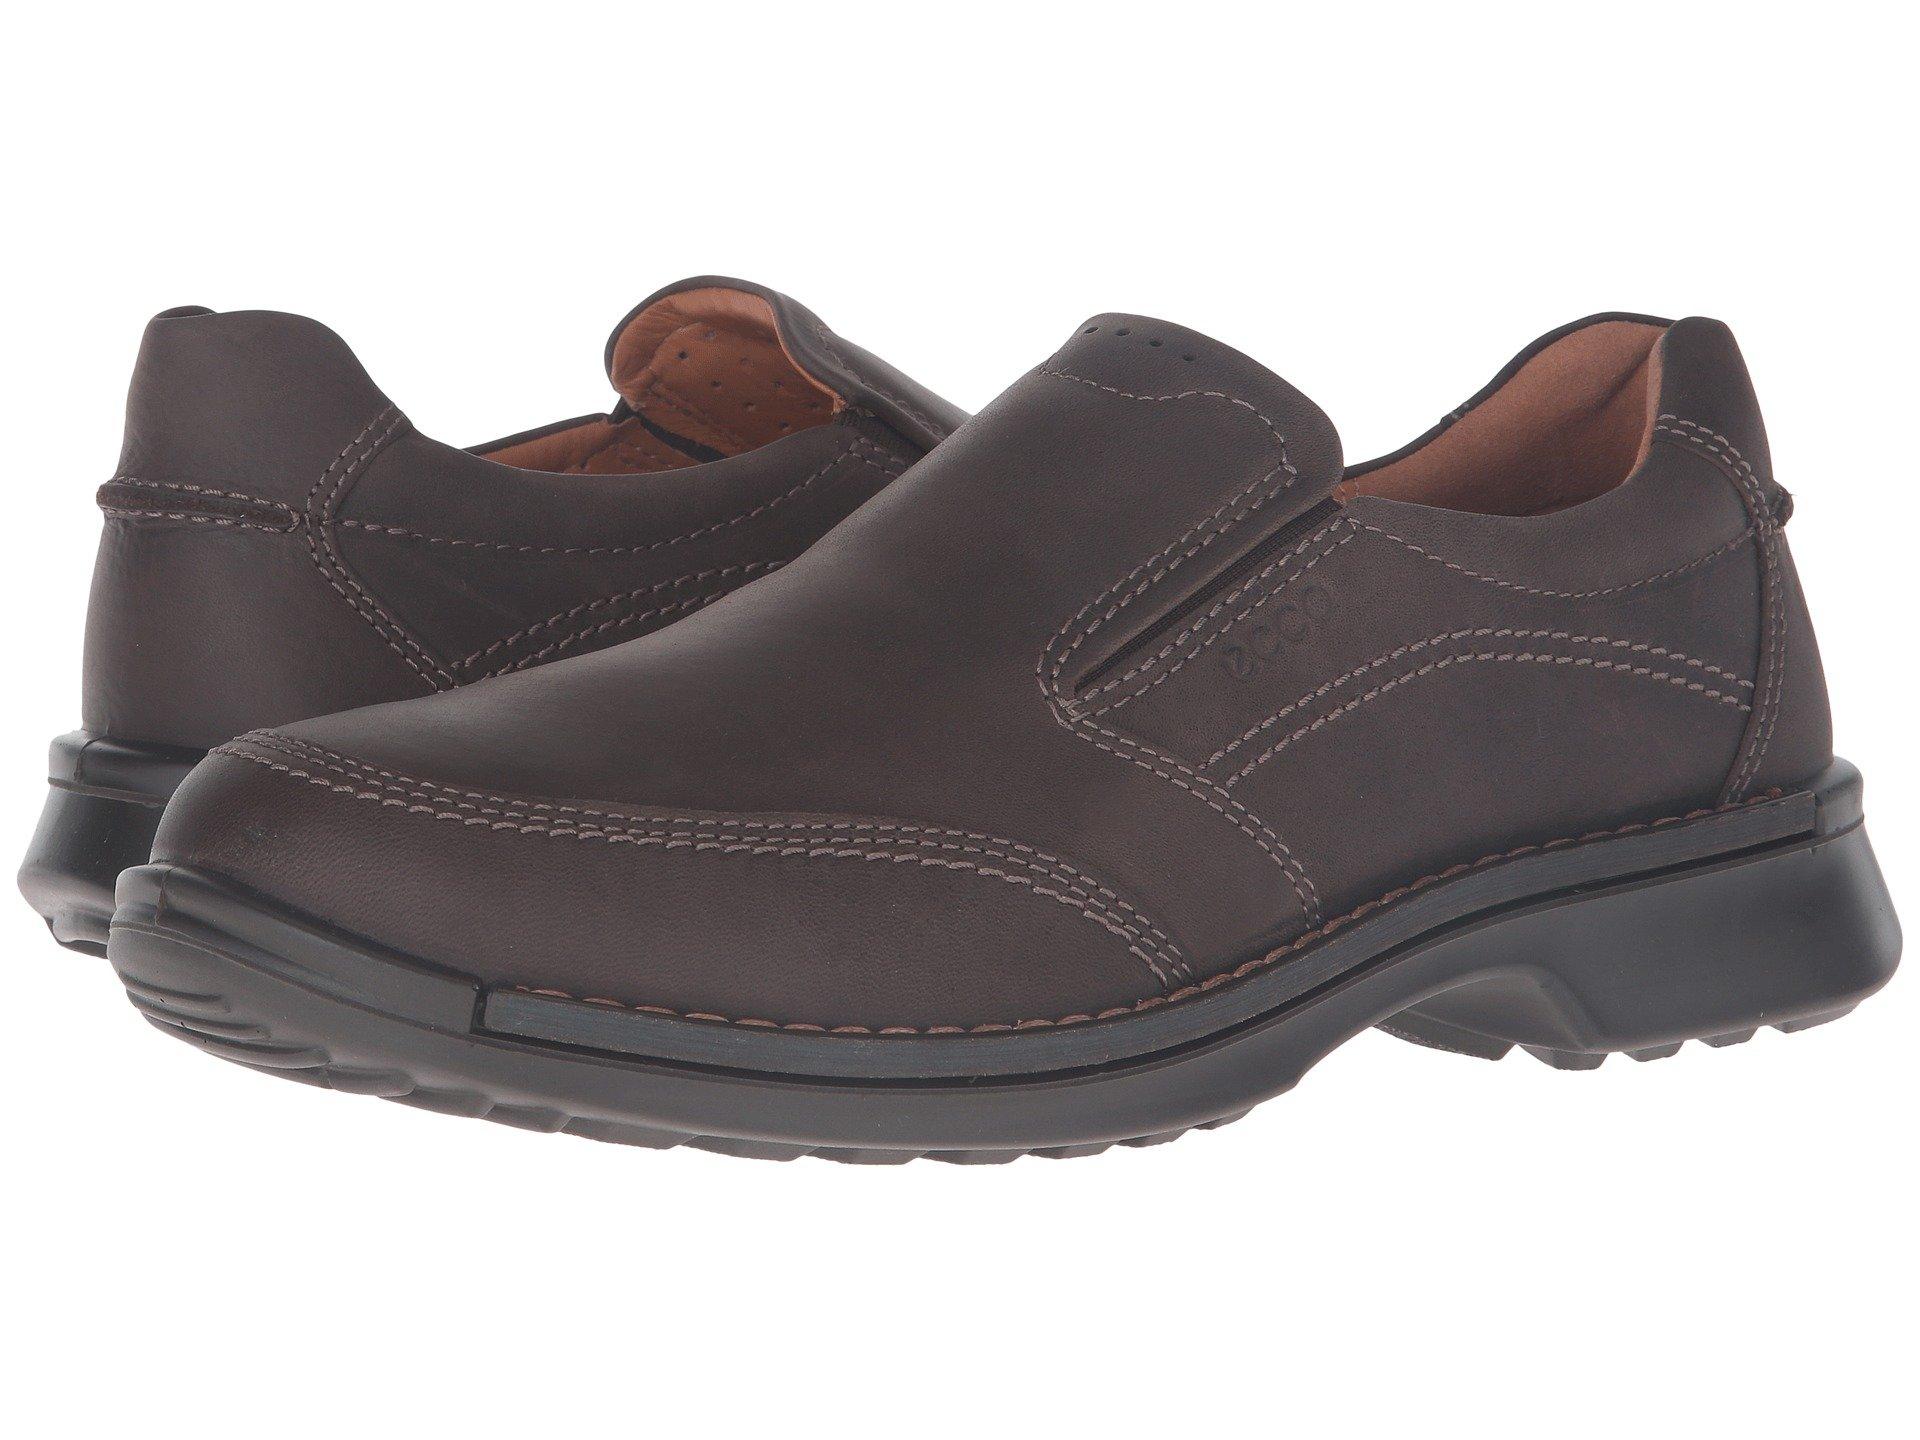 Ecco Leather Fusion Ii Slip-on in Coffee (Brown) for Men - Lyst